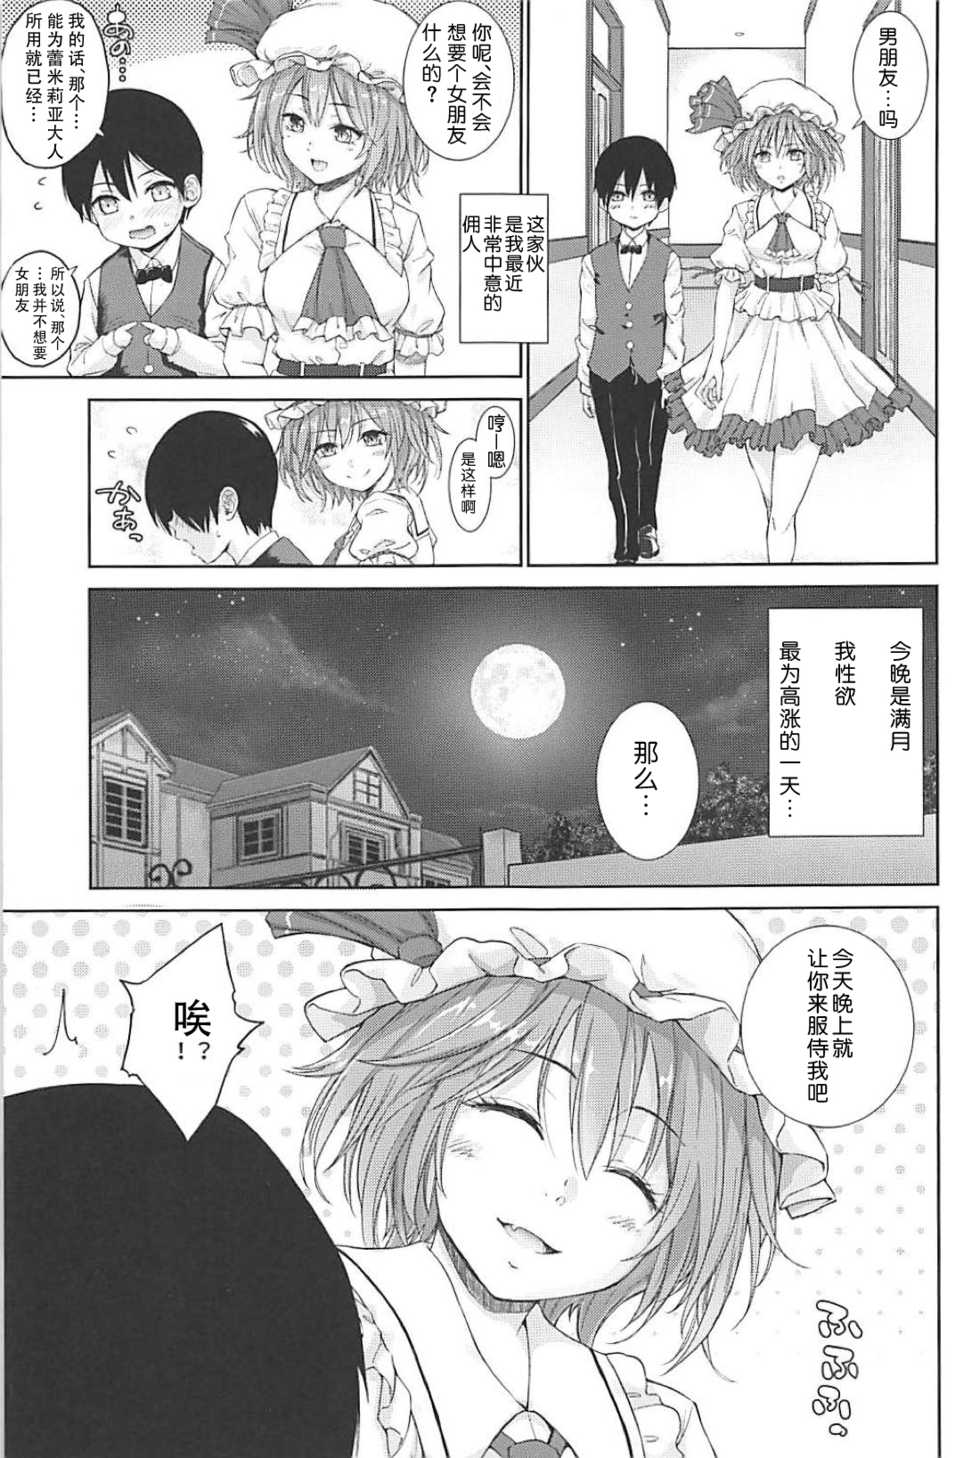 (C94) [Studio P.M.Y (Mikarin)] Full Moon x Remilia-sama (Touhou Project) [Chinese] [靴下汉化组] - Page 4